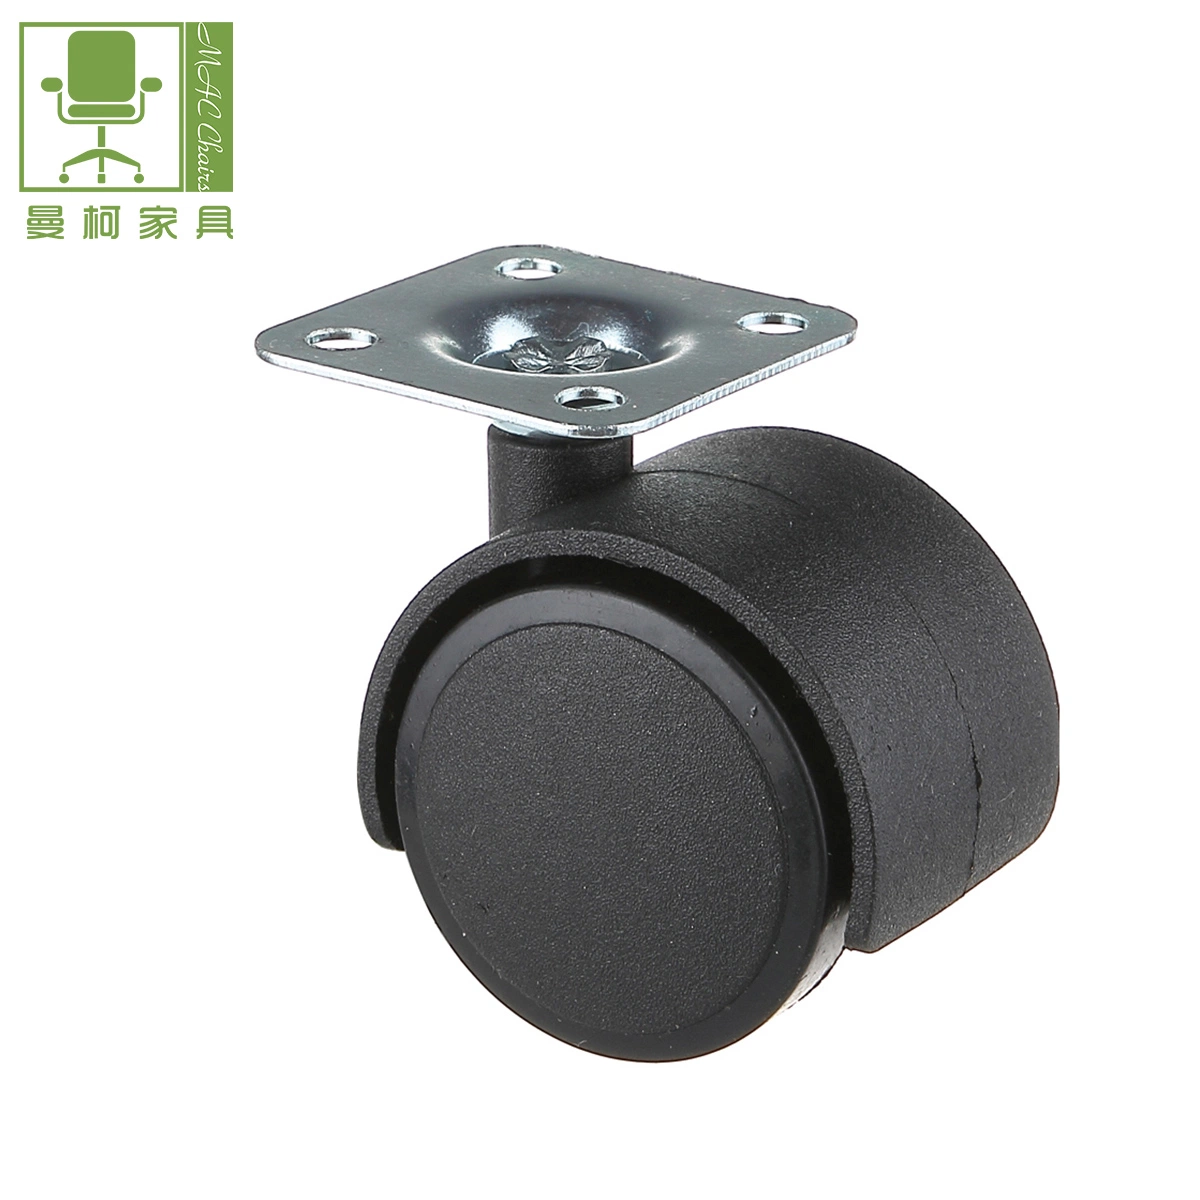 Wheel Swivel Office Chair Caster of Chair Parts